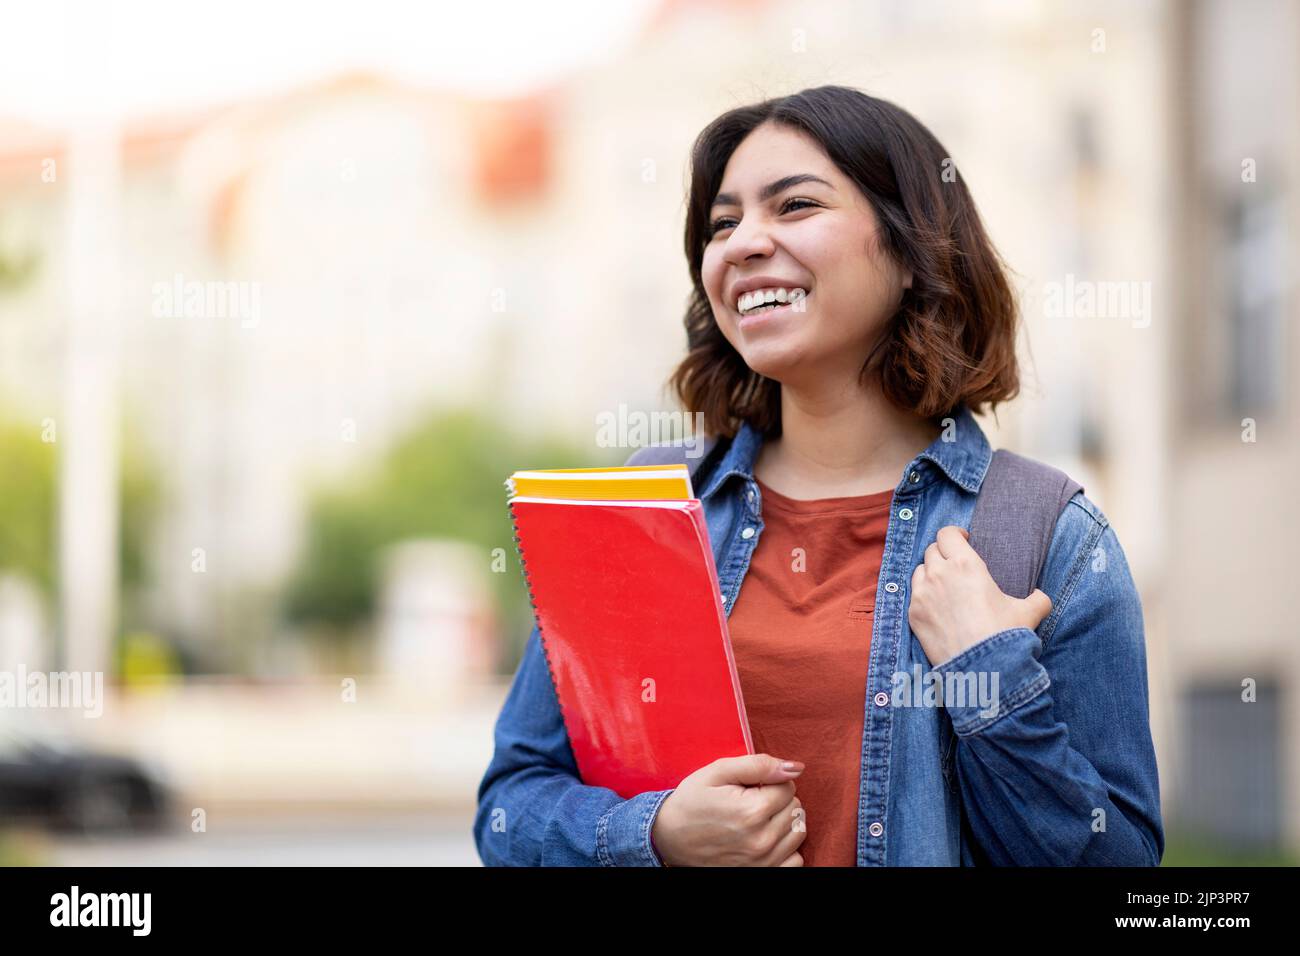 Portrait Of Beautiful Arab Female Student With Workbooks In Hand Posing Outdoors Stock Photo